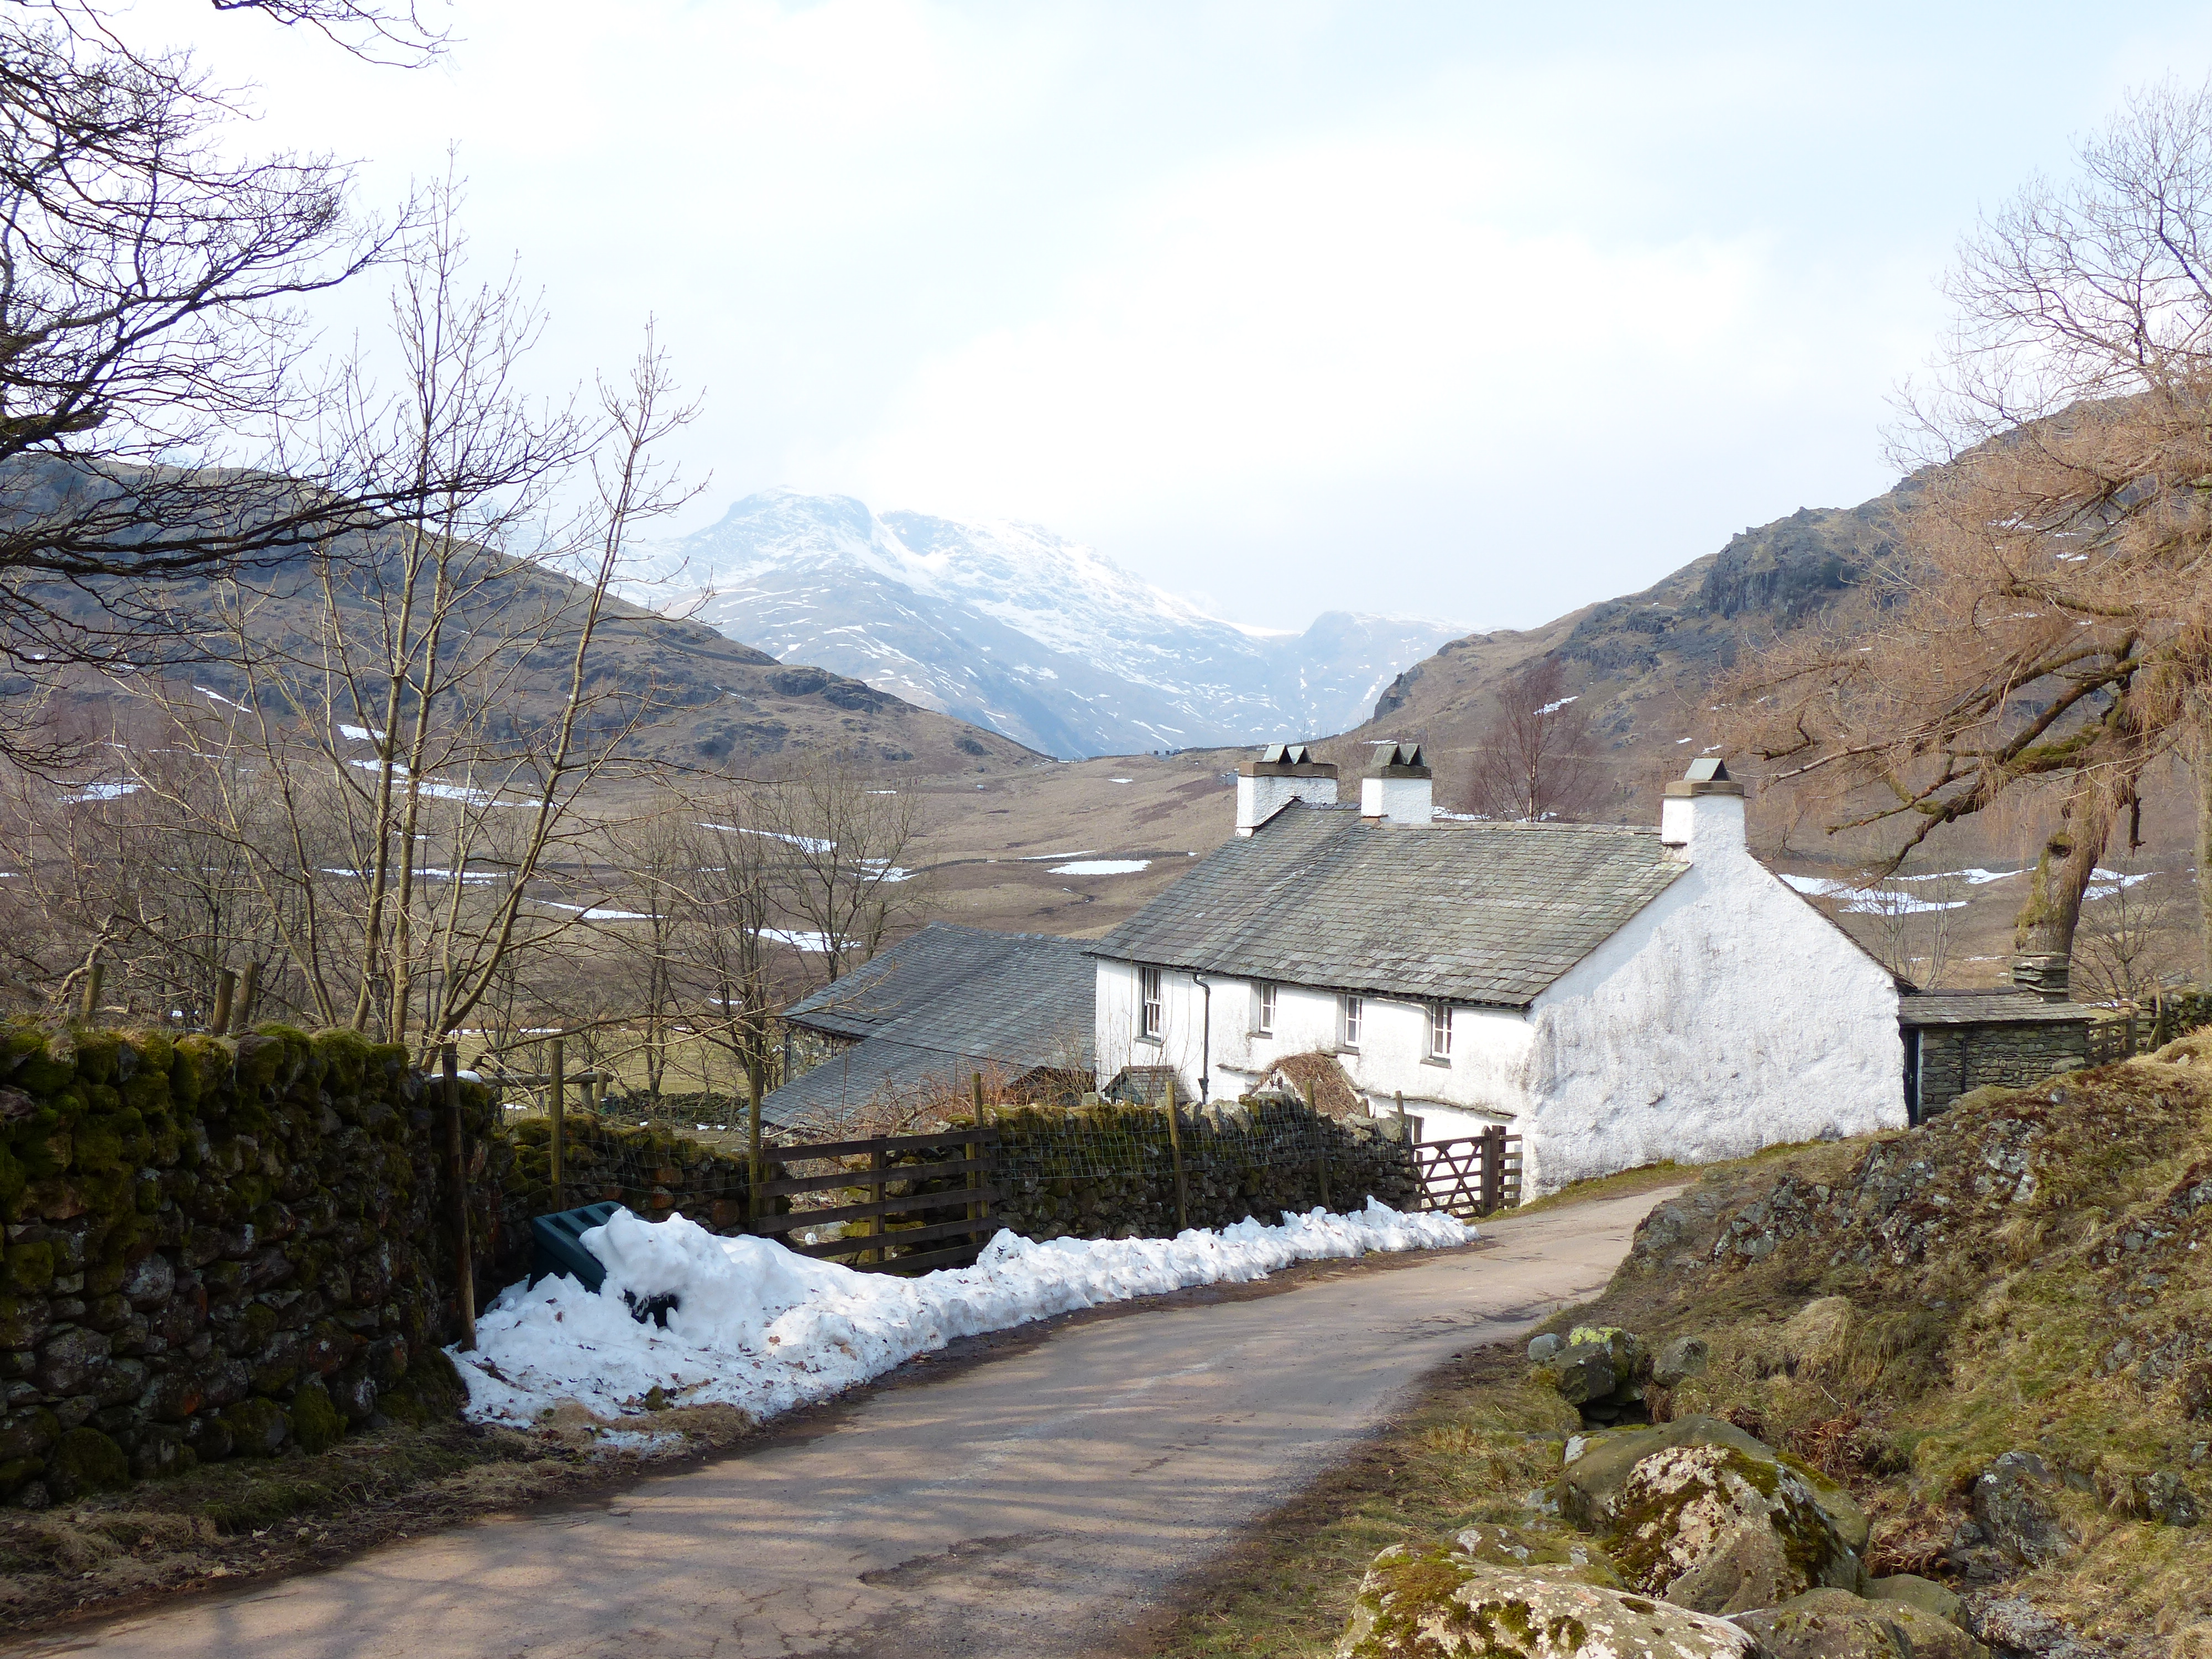 Cottage on road between Langdale and Wrynose, with thatched porch